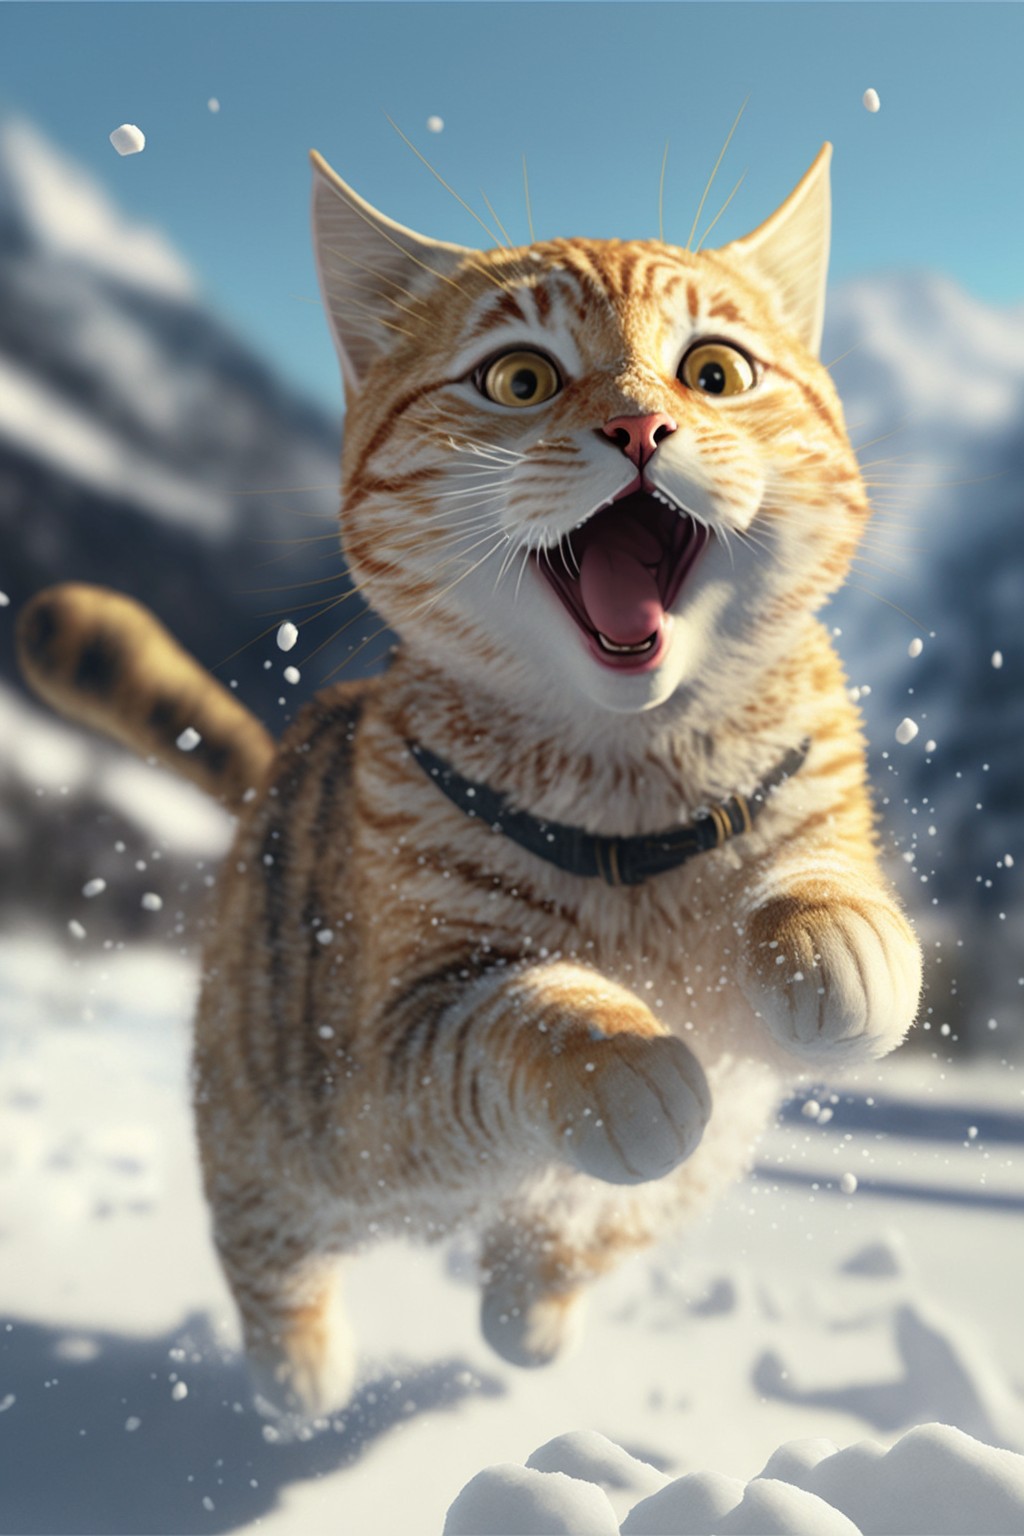 Silly cat jumping happily in the snow